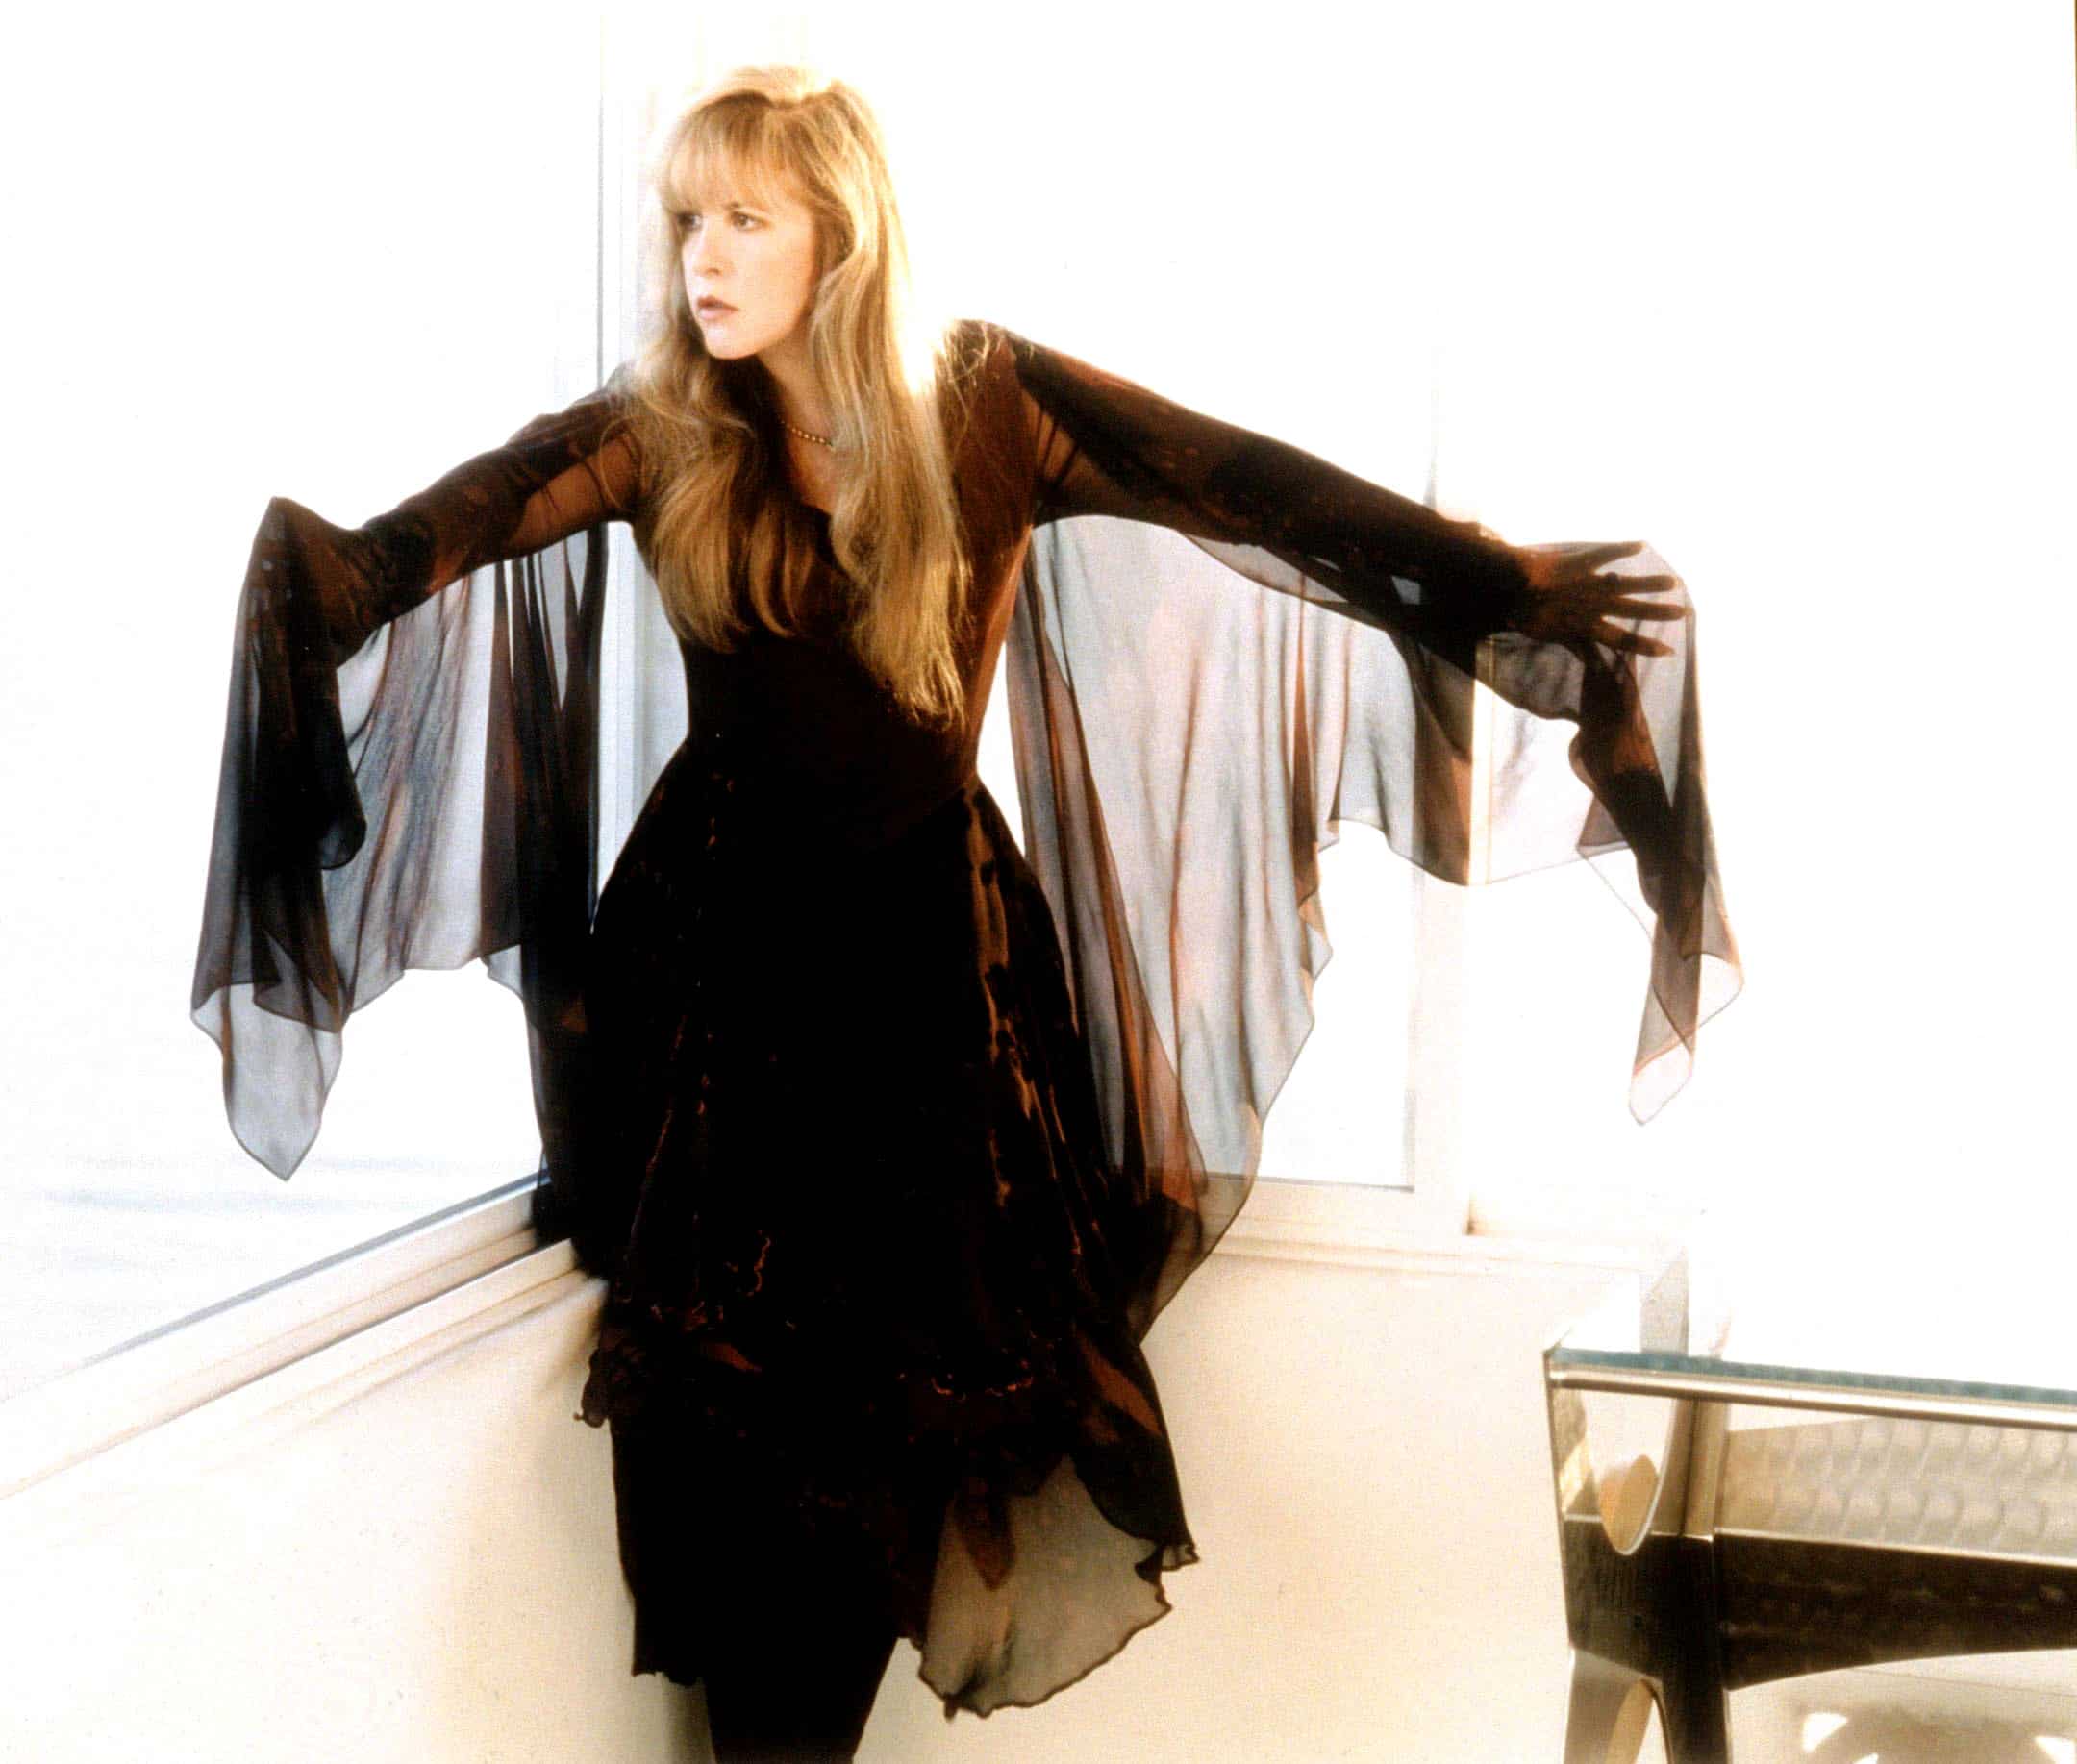 STEVIE NICKS in a publicity photo for the 2001 Blockbuster Awards, airing 04/11/01